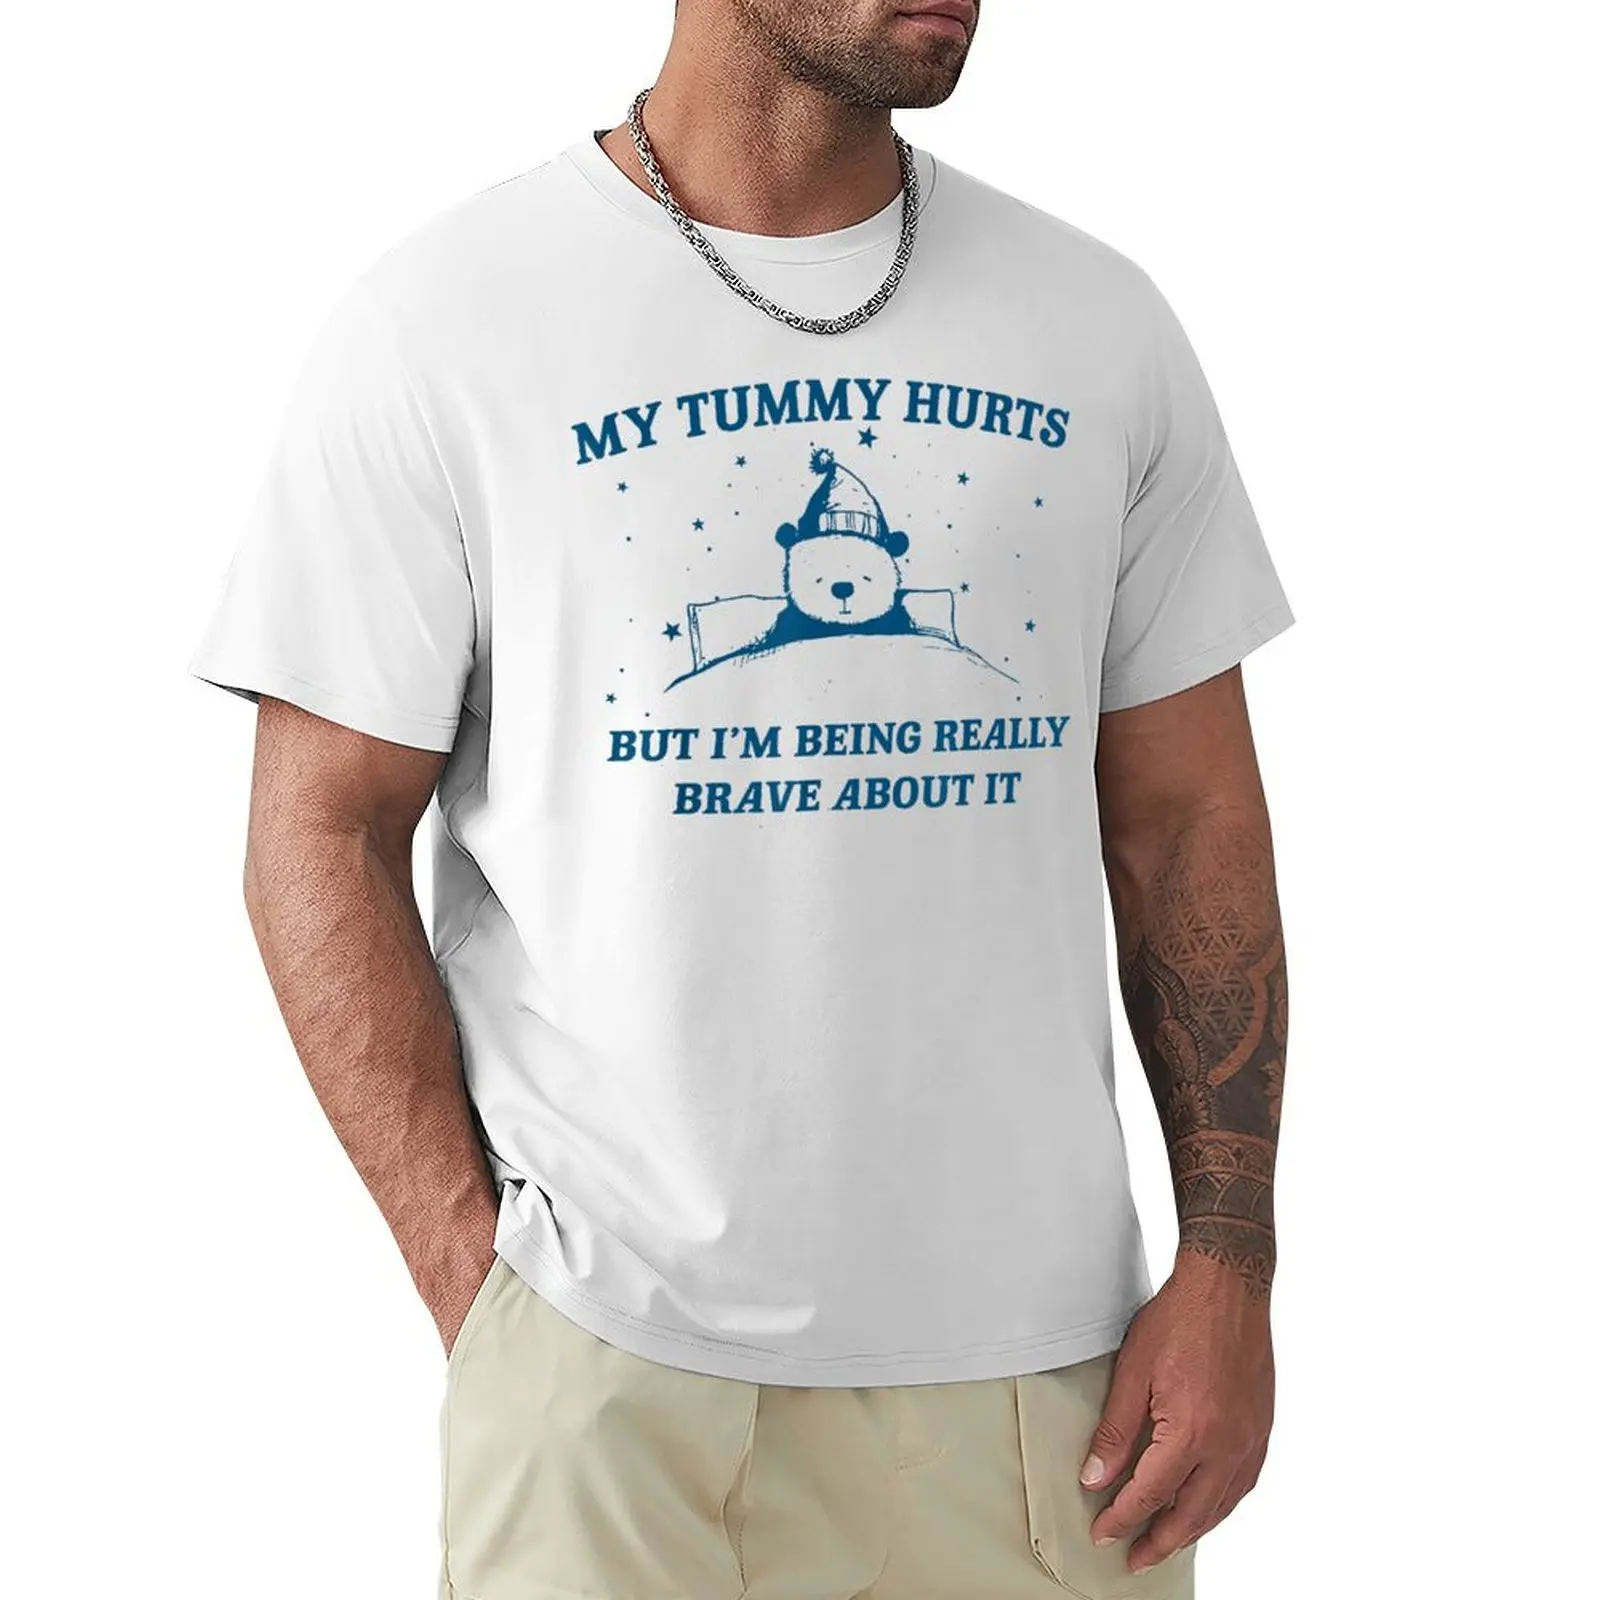 

bear my tummy hurts but i'm being really brave about it T-Shirt boys whites animal prinfor boys tees slim fit t shirts for men